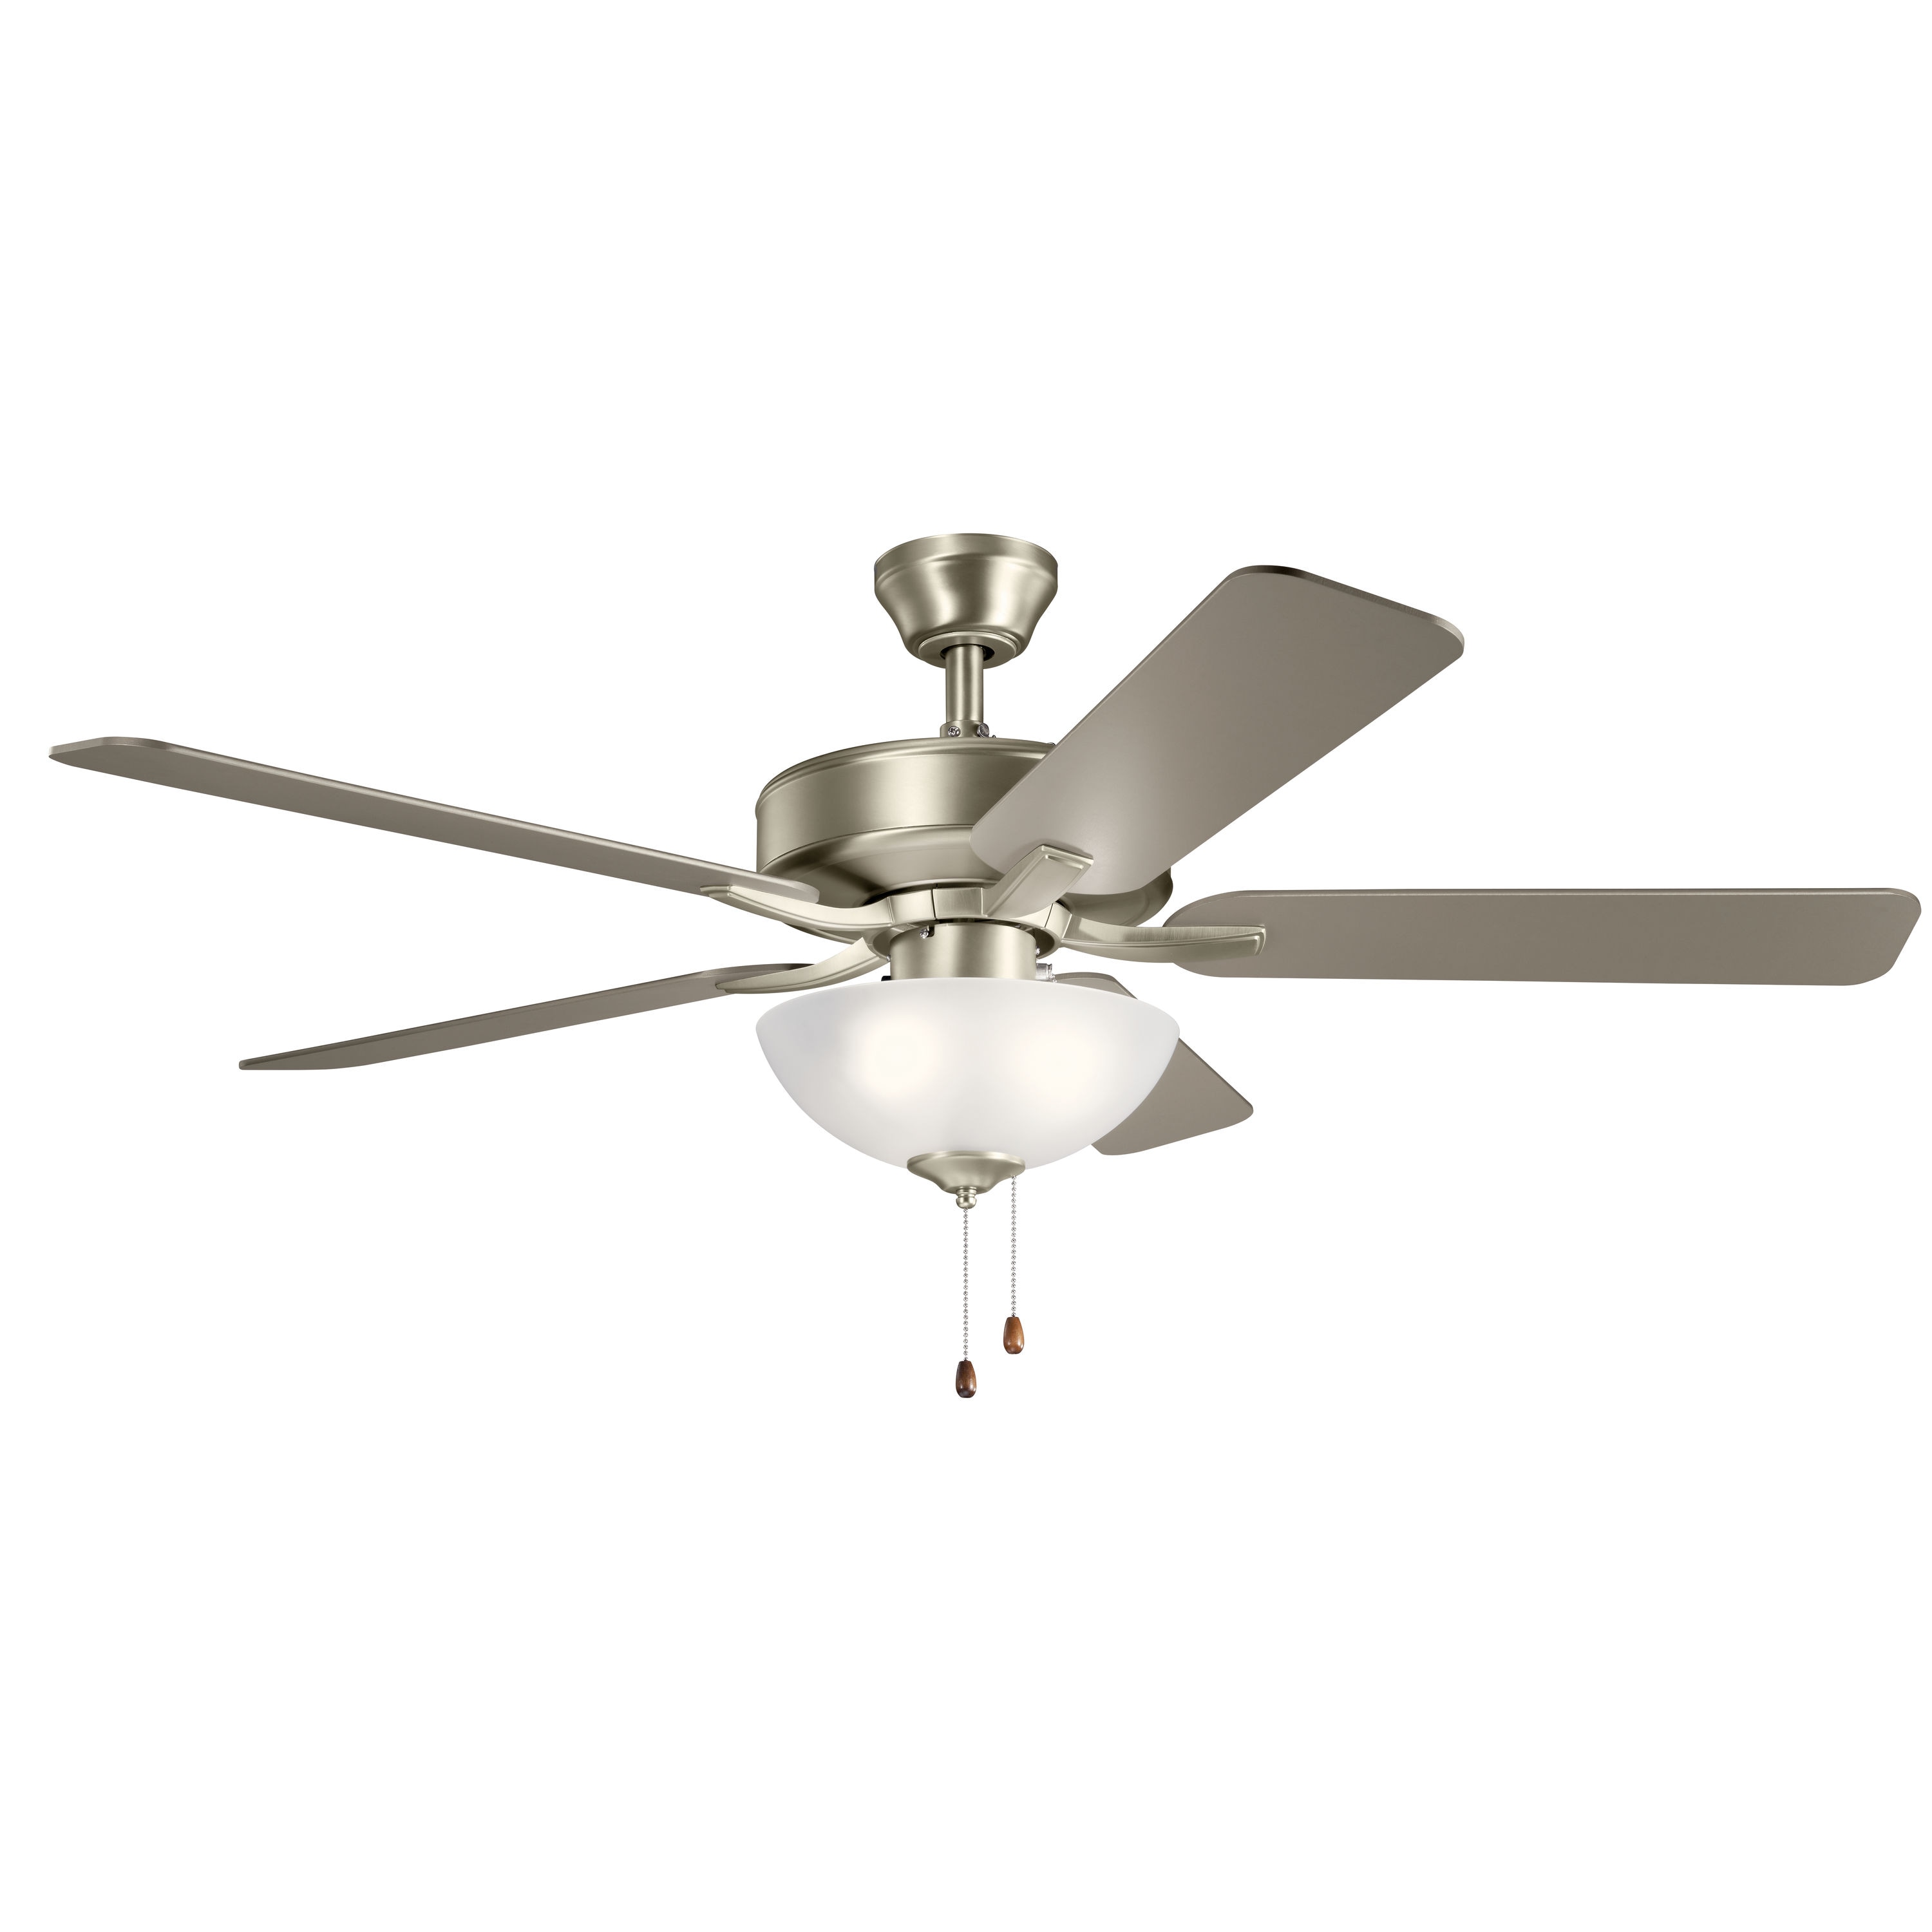 Kichler Basics Pro Select 52-in Brushed Nickel Indoor Ceiling Fan with ...